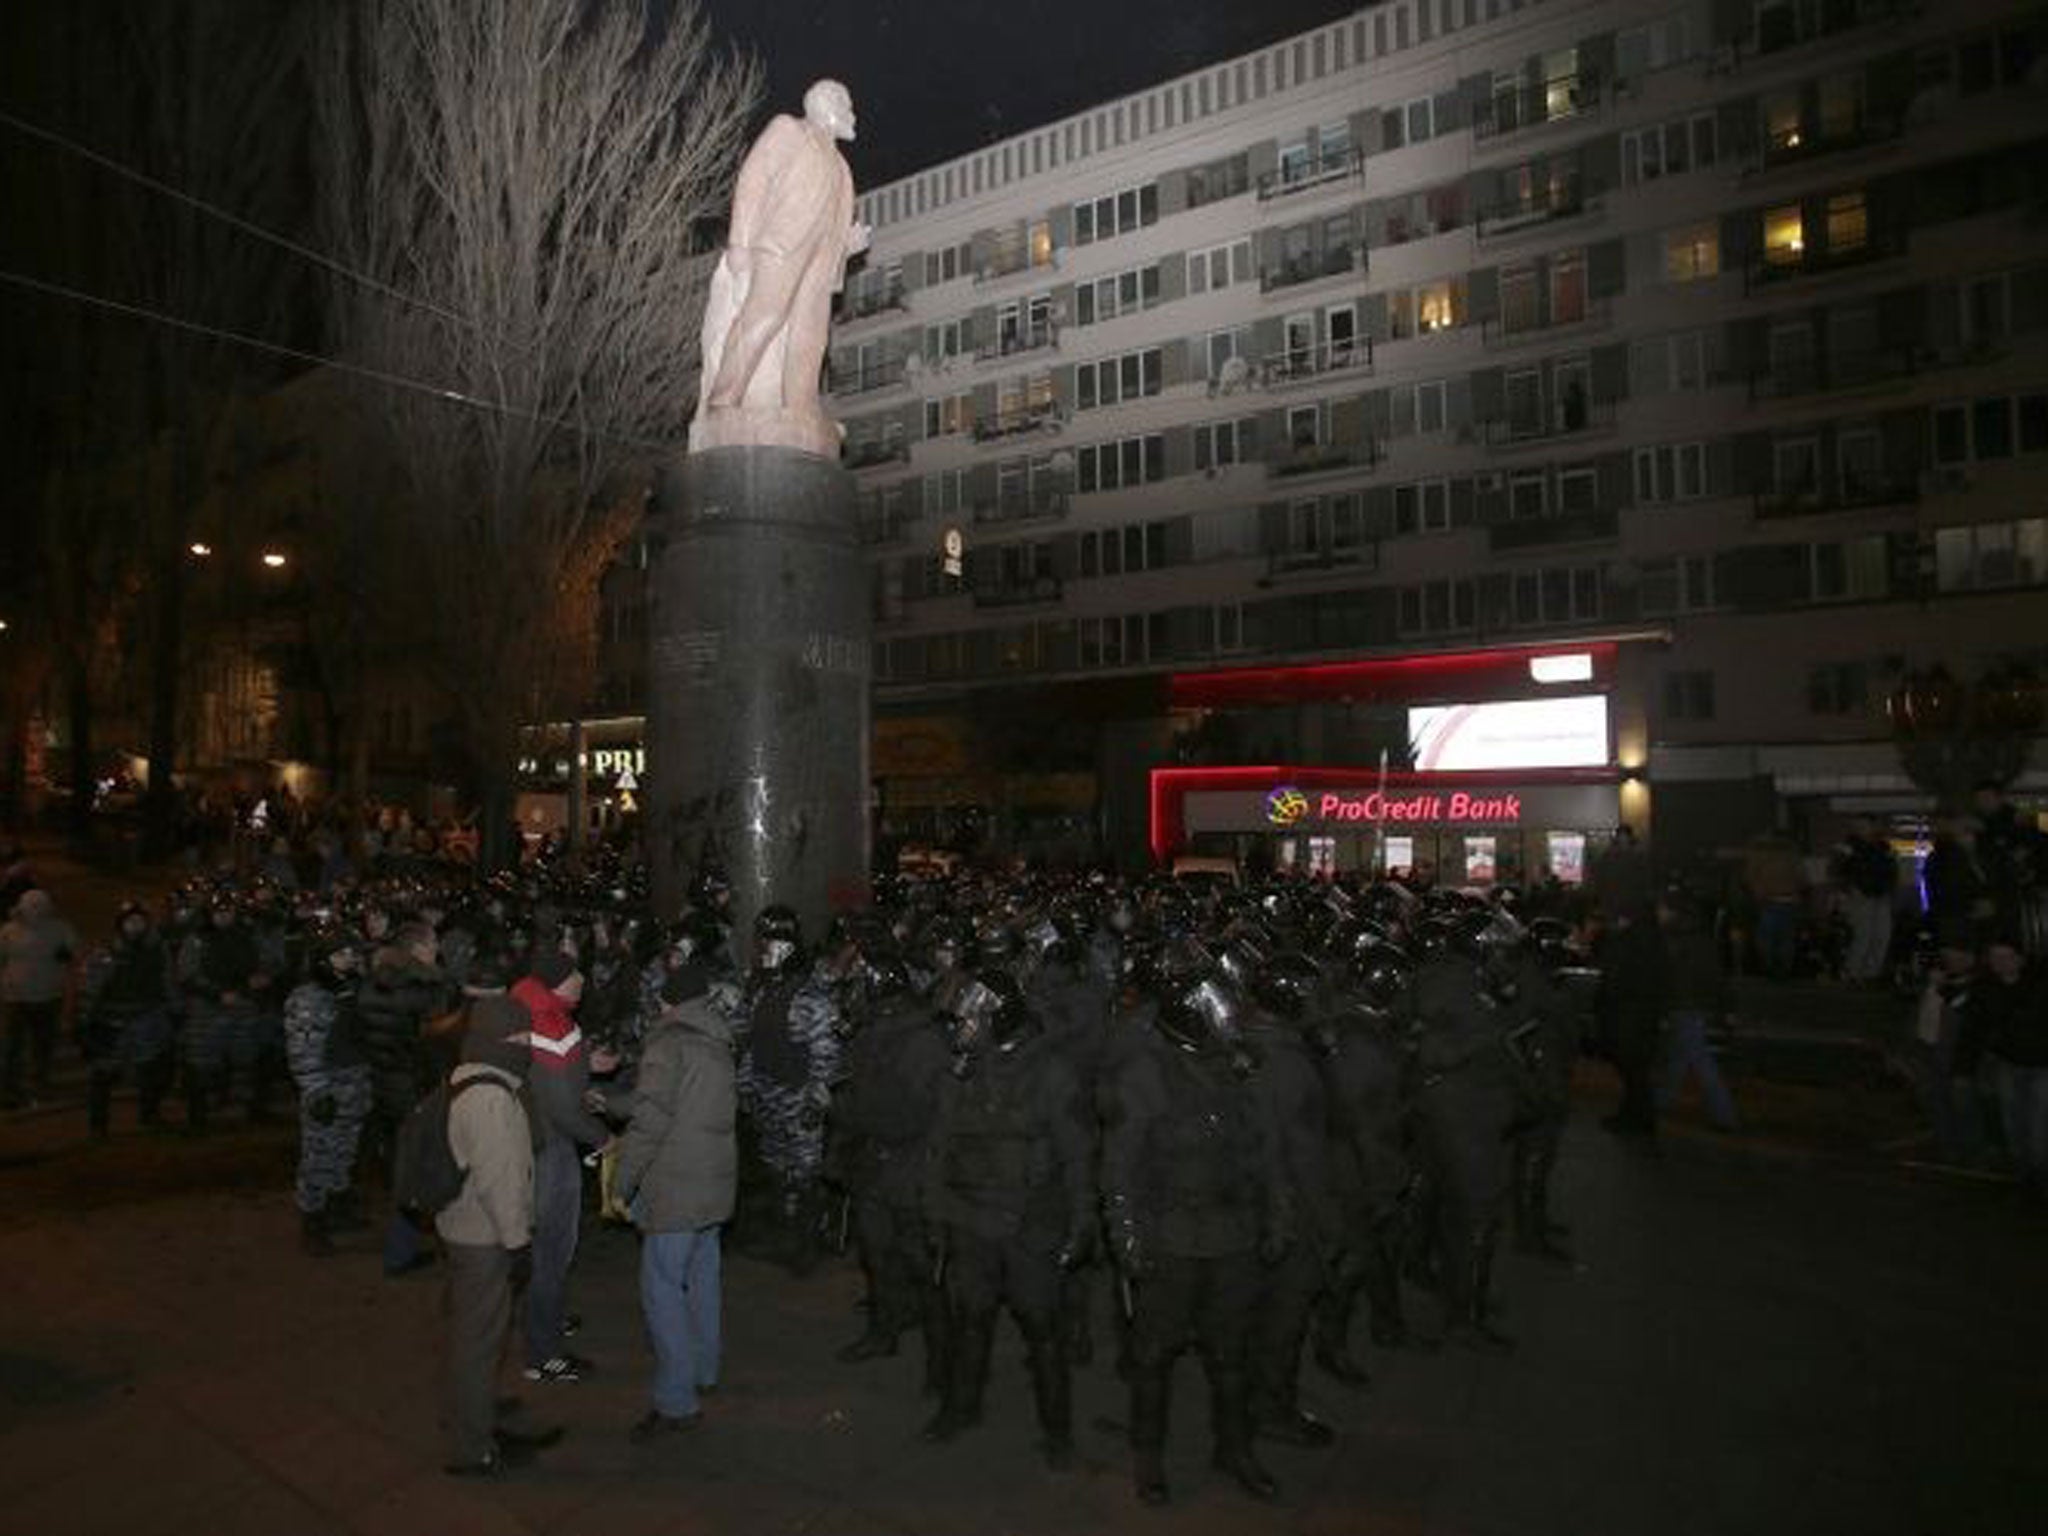 The statue has been the target of protests in recent weeks, and can be seen heavily defended in this picture from 1 December